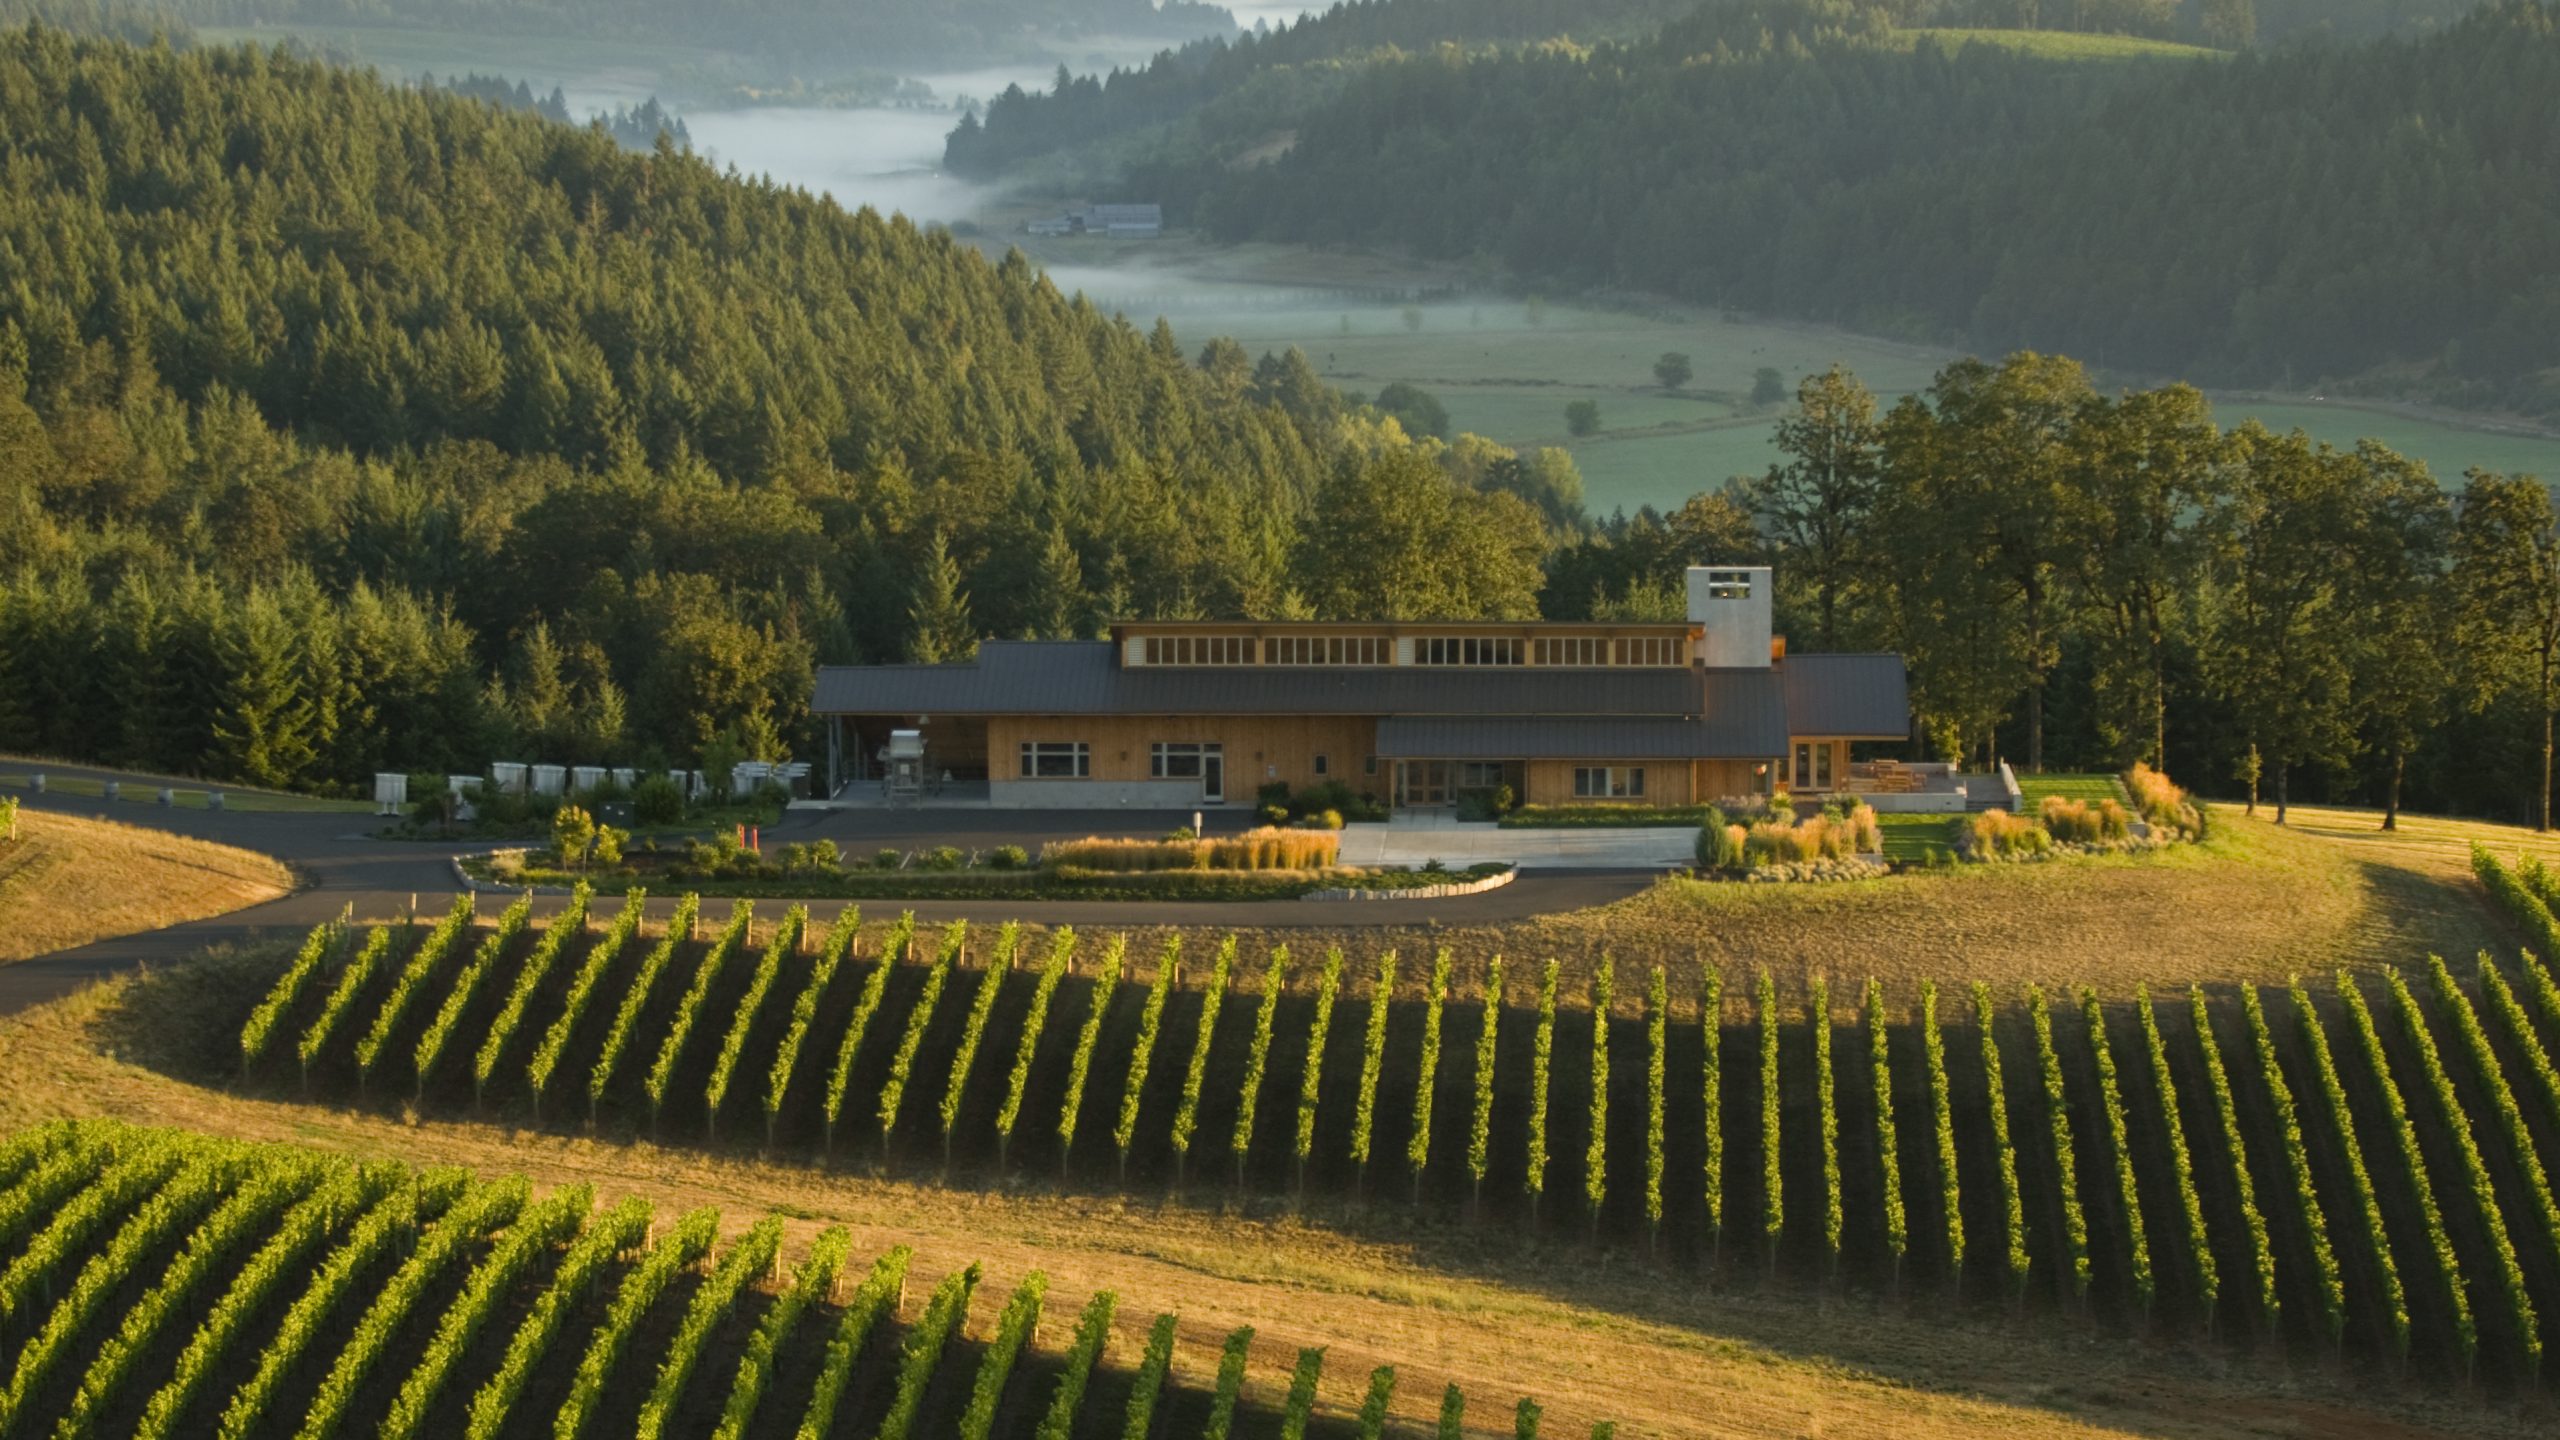 “Oregon is right now the single most exciting winemaking area in the United States…”